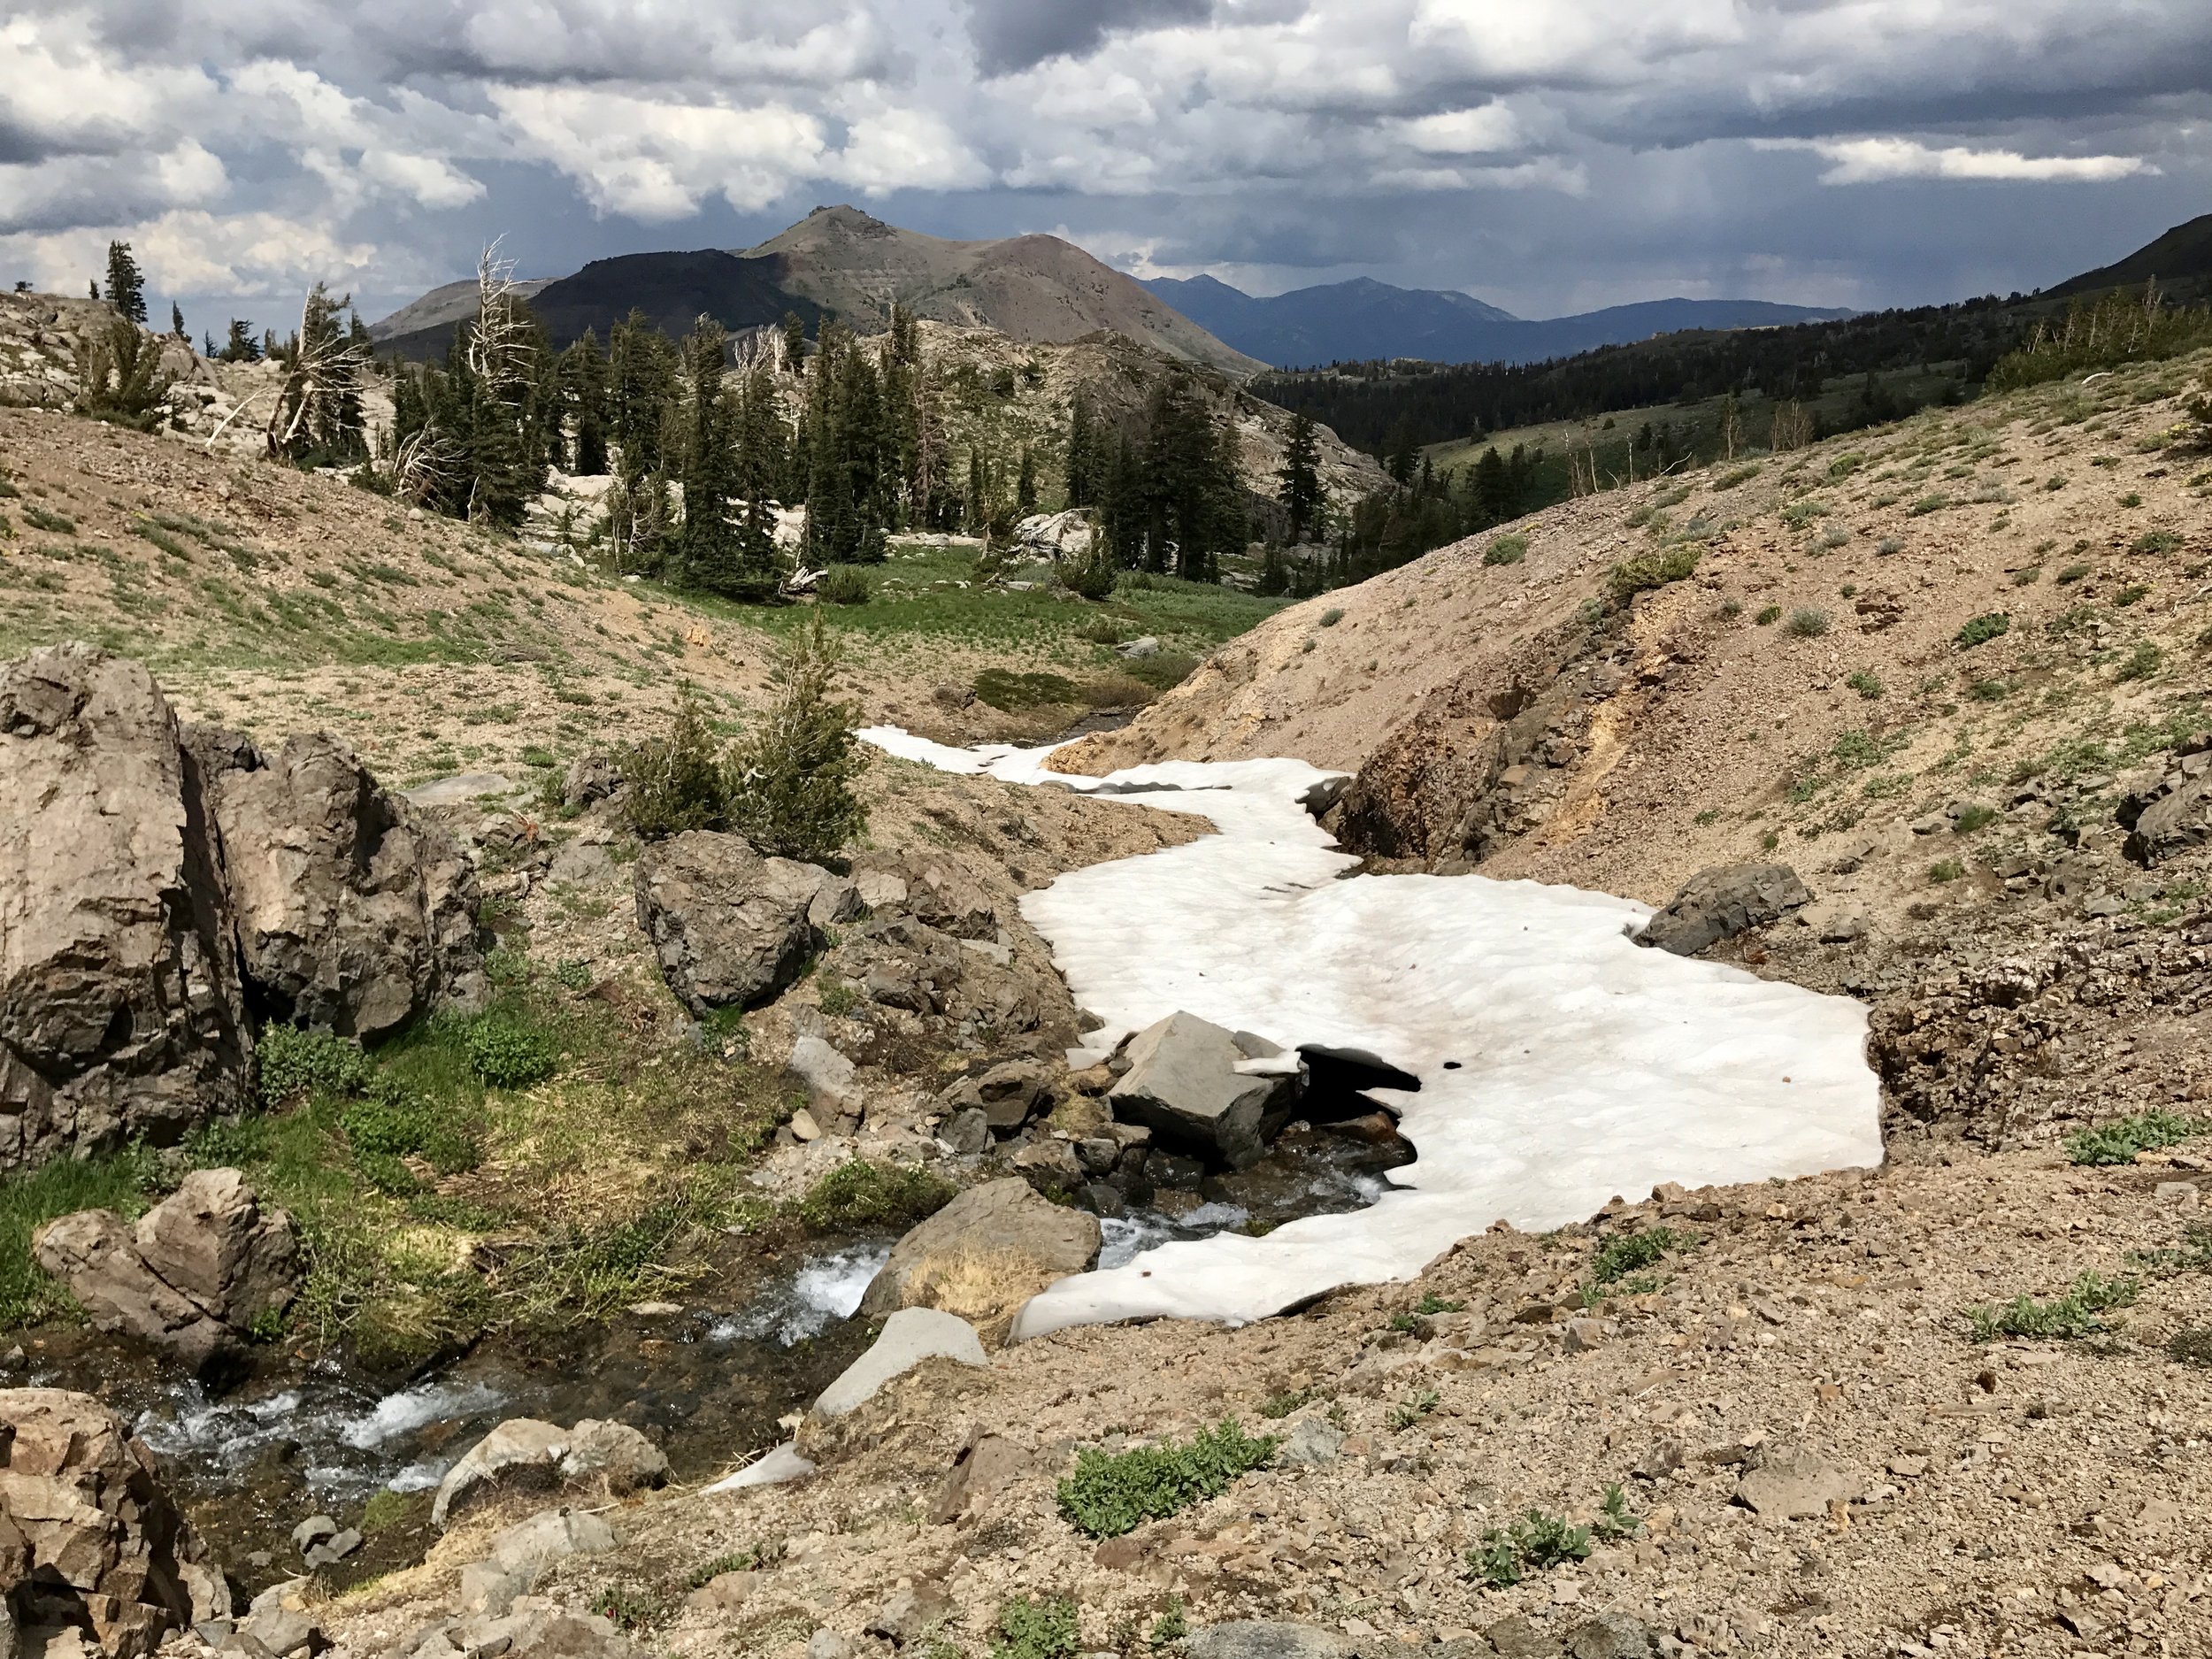   Snow-filled creek bed, with a snow-melt creek running underneath.  